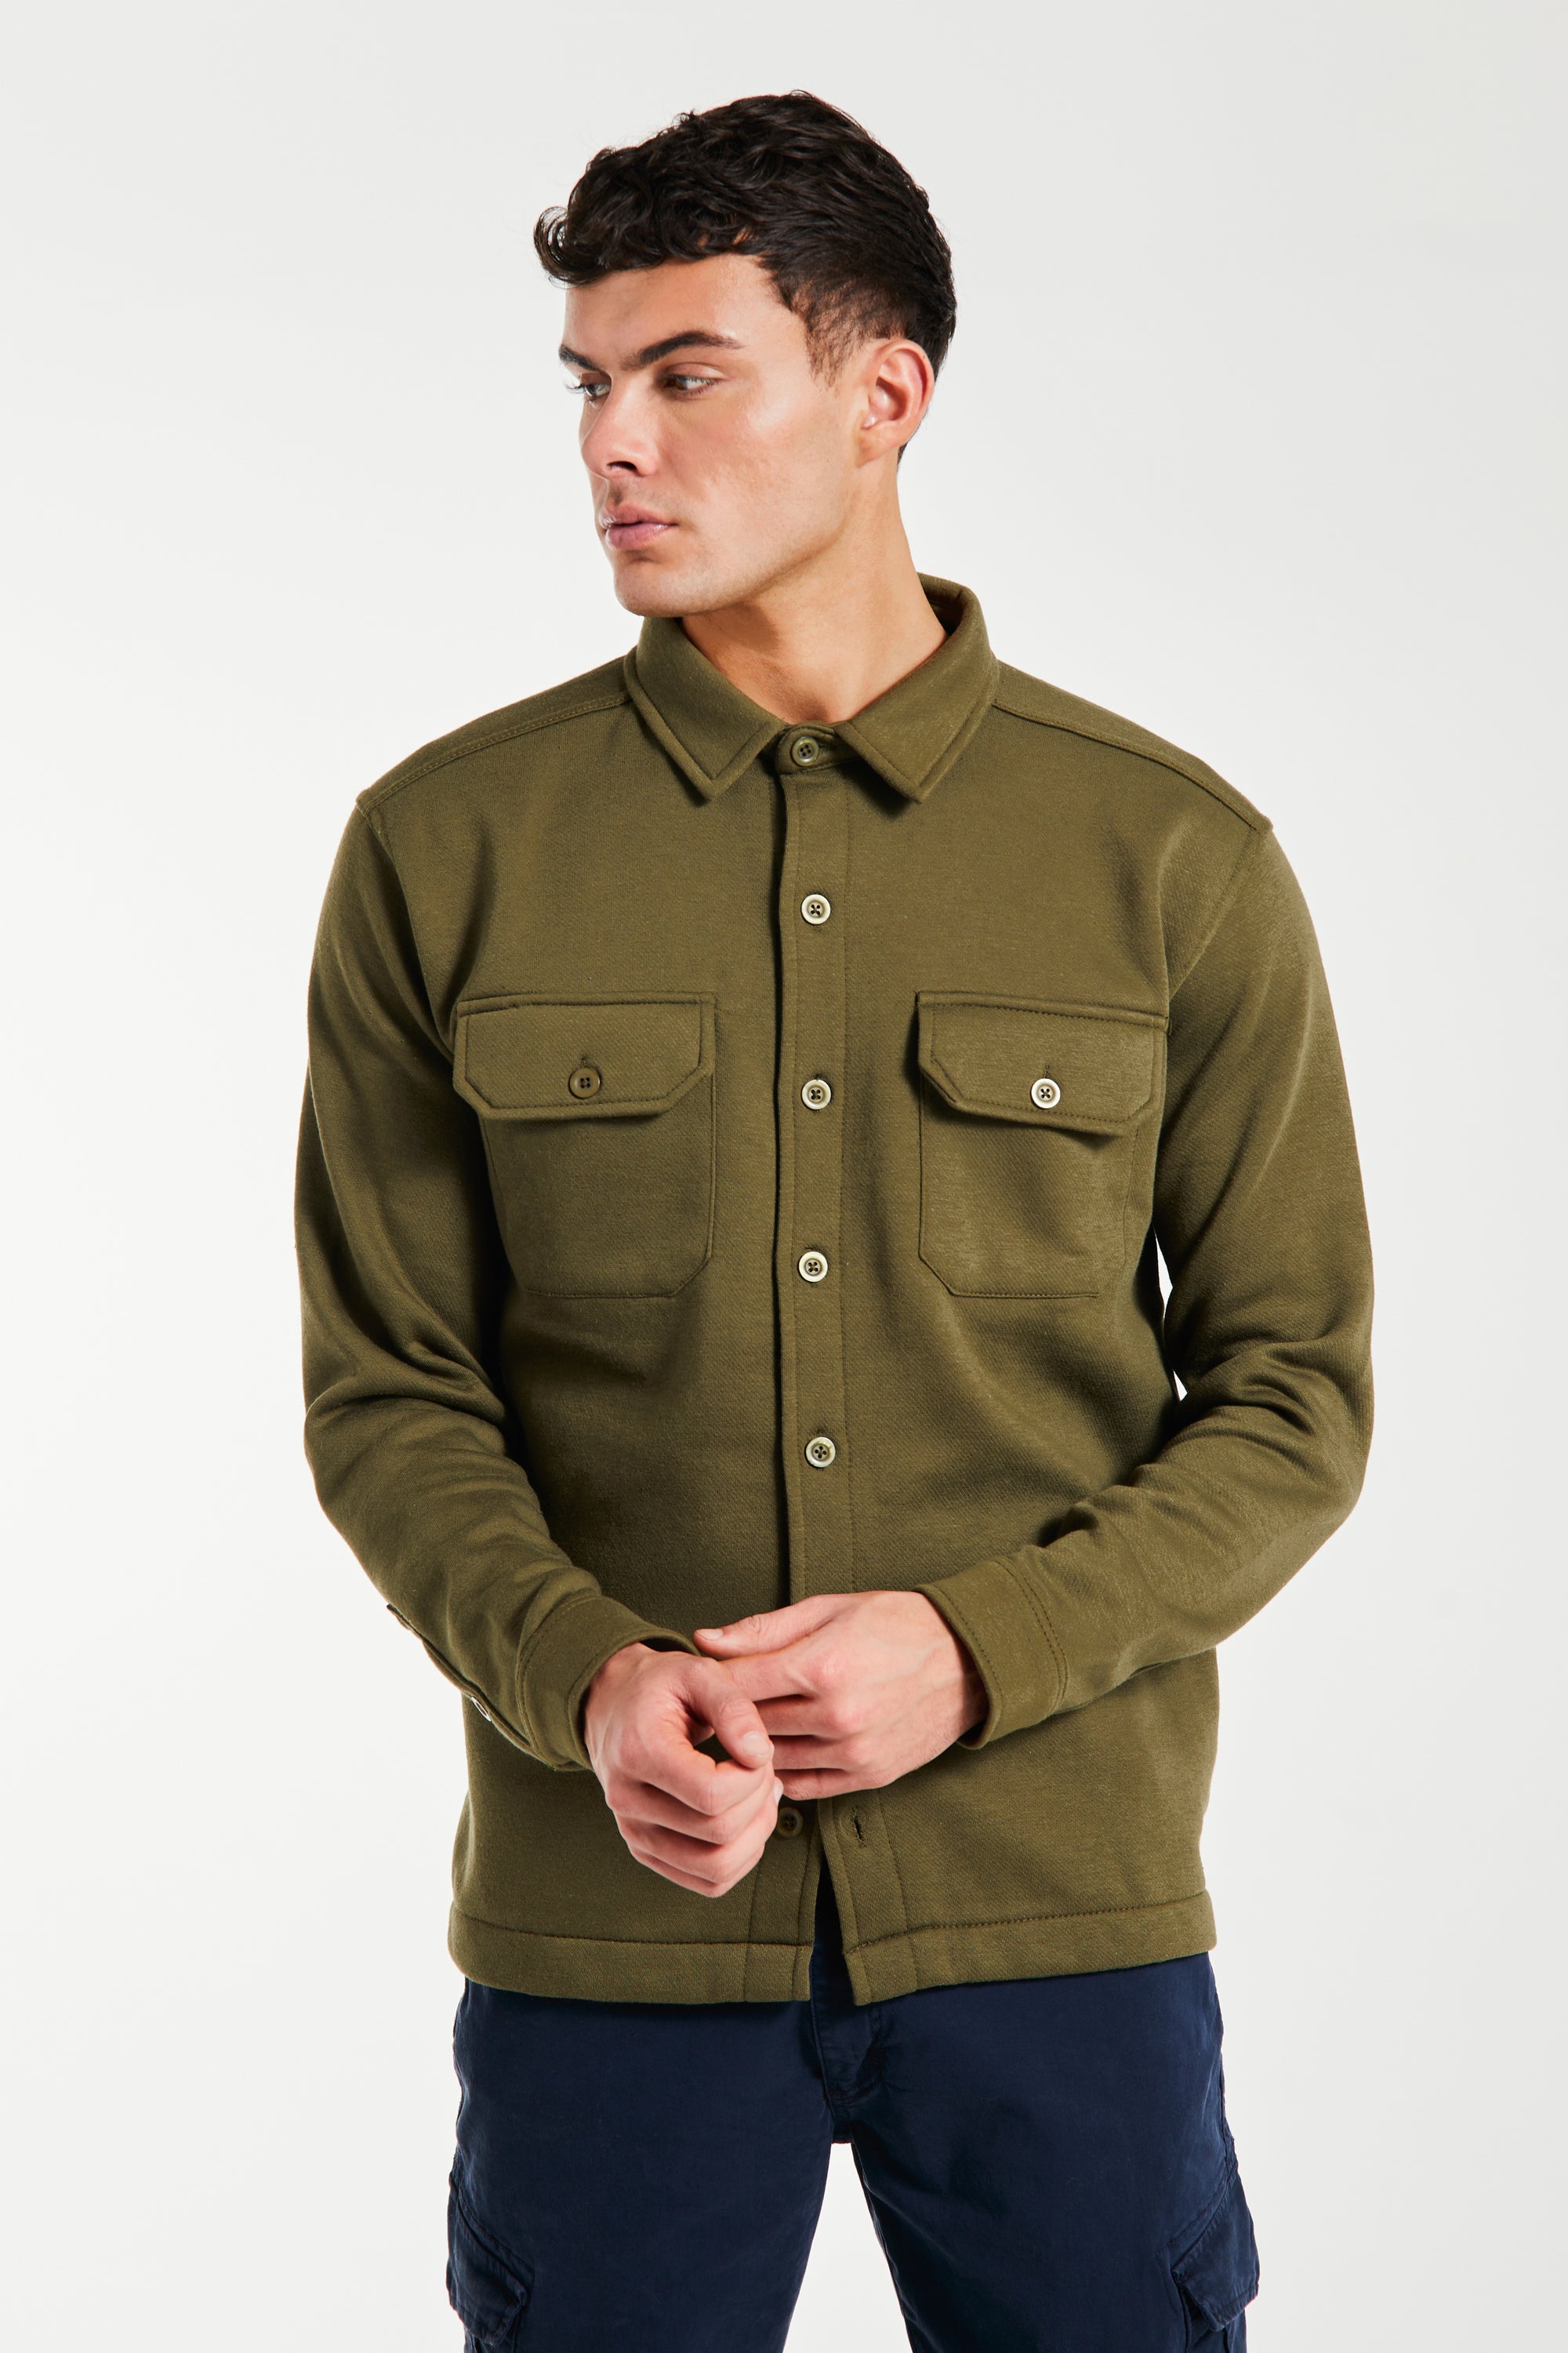 Model wearing khaki green over shirt jacket with buttons